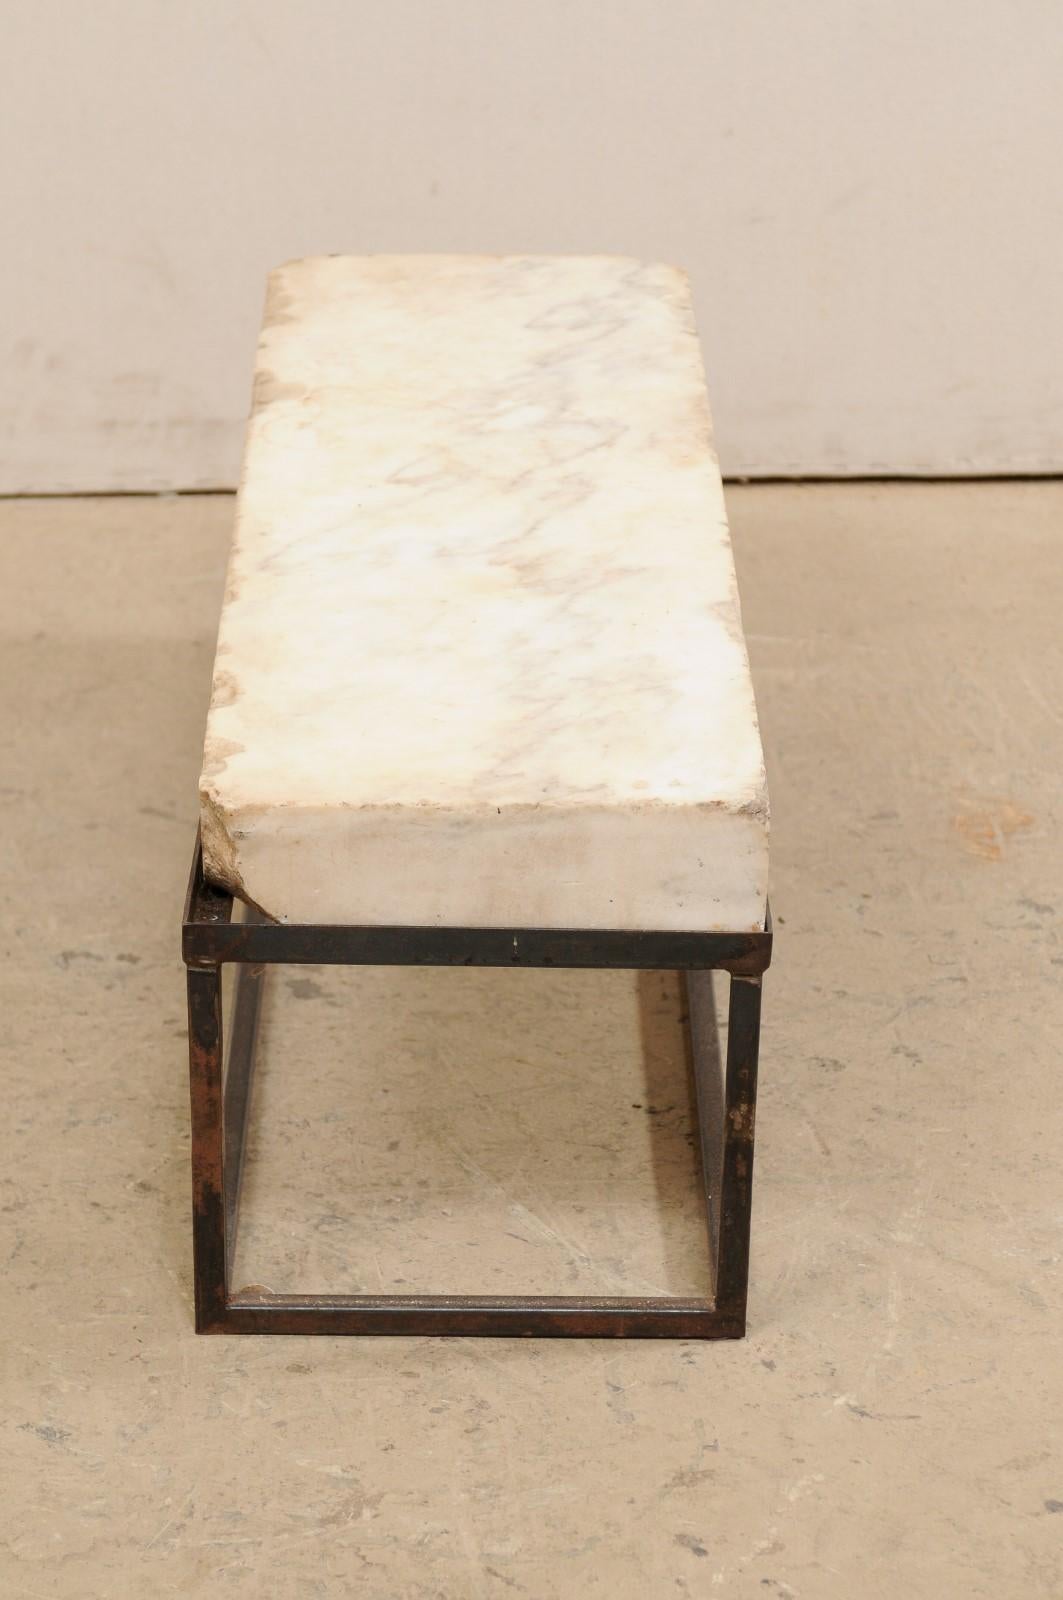 19th Century European Thick Marble Slab Top Coffee Table 'or Bench' with New Iron Base